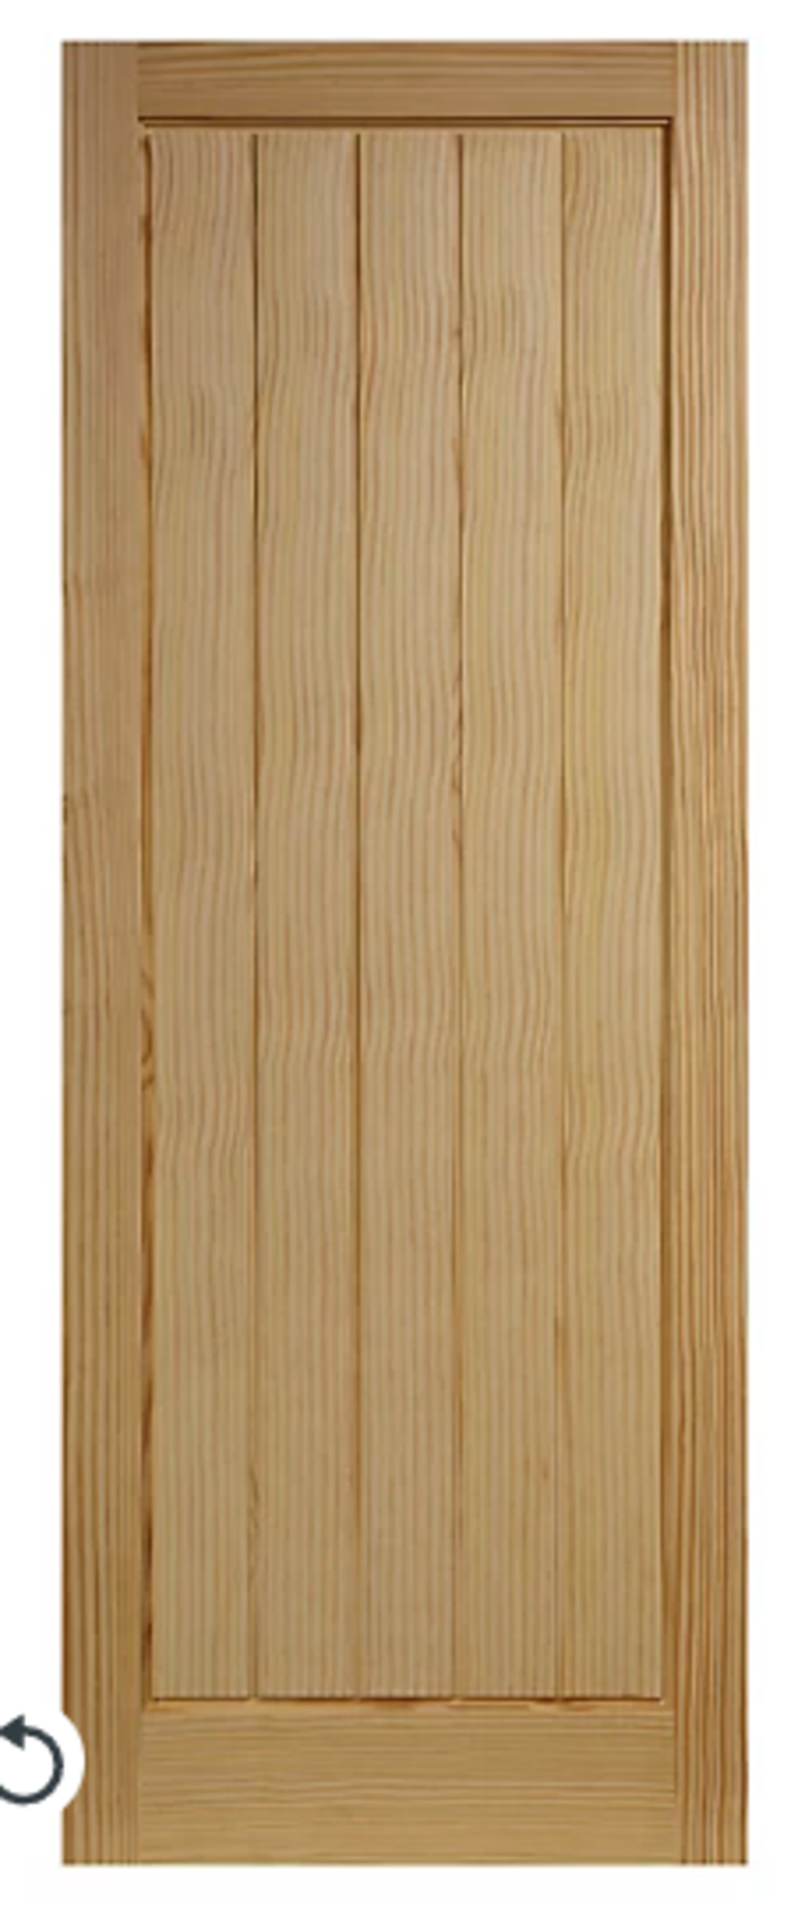 4 X MIXED PANEL DOORS/GLAZED DOORS INCLUDING CLEAR PINE, OAK VENEER, KNOTTY PINES AND MORE (CONTAINS